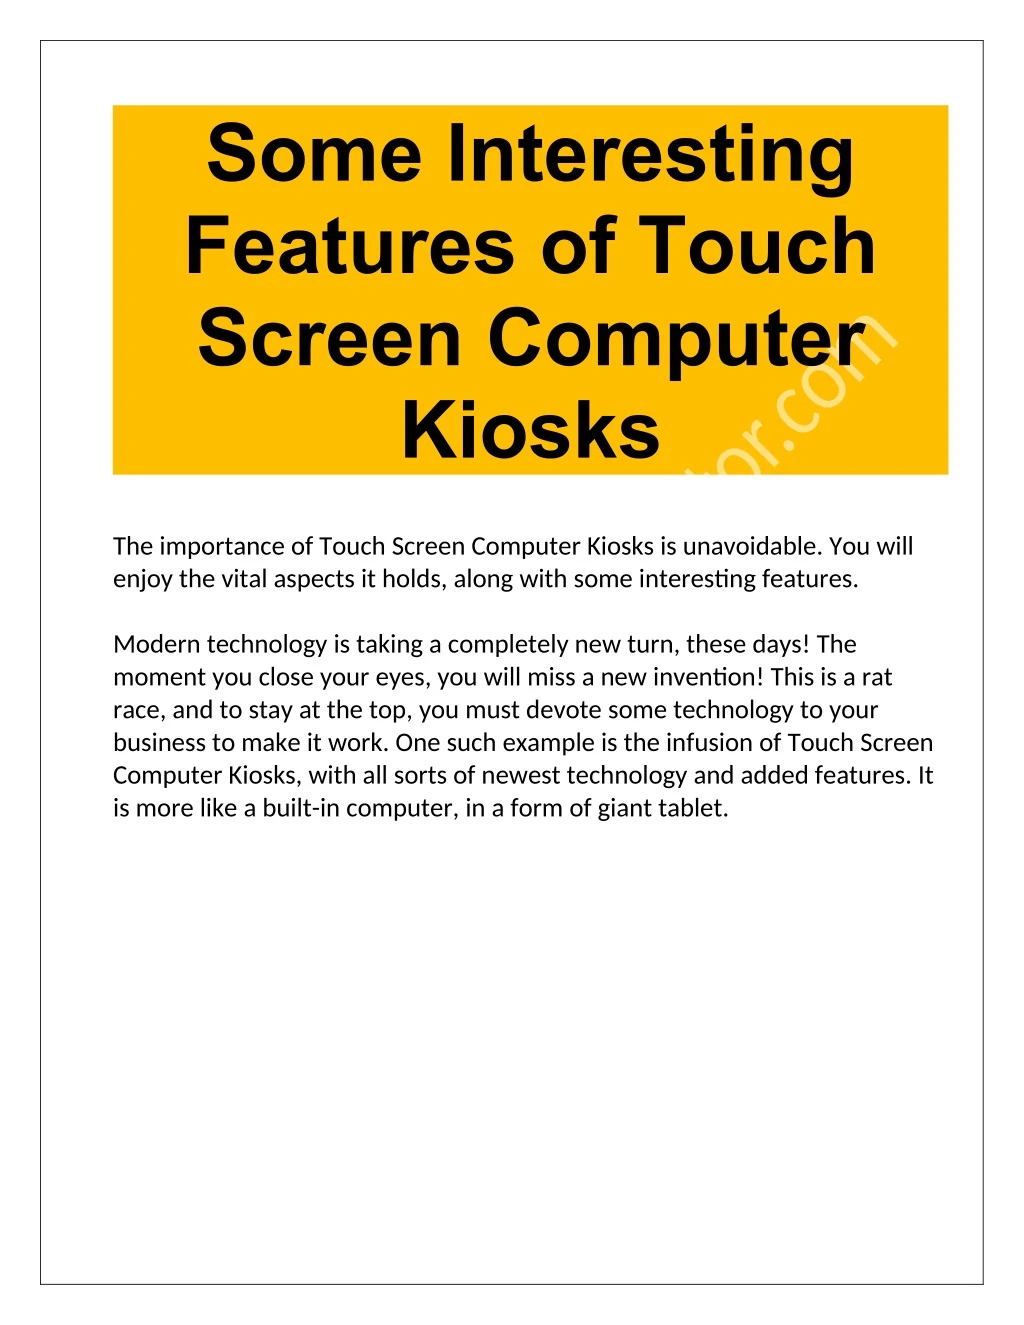 some interesting features of touch screen